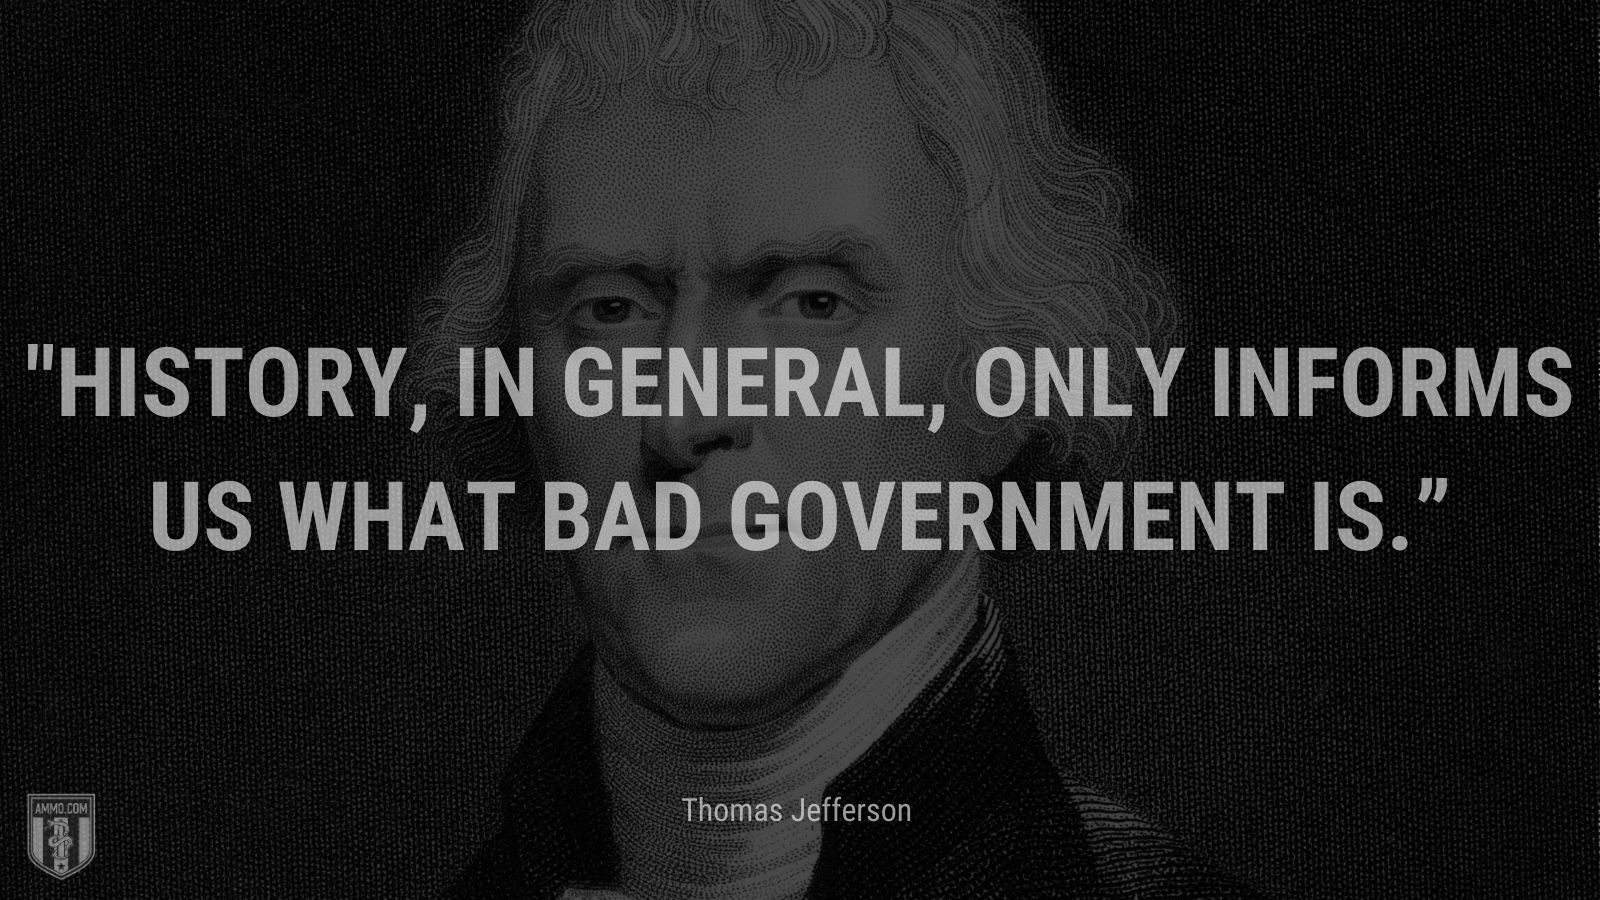 “History, in general, only informs us what bad government is.” - Thomas Jefferson